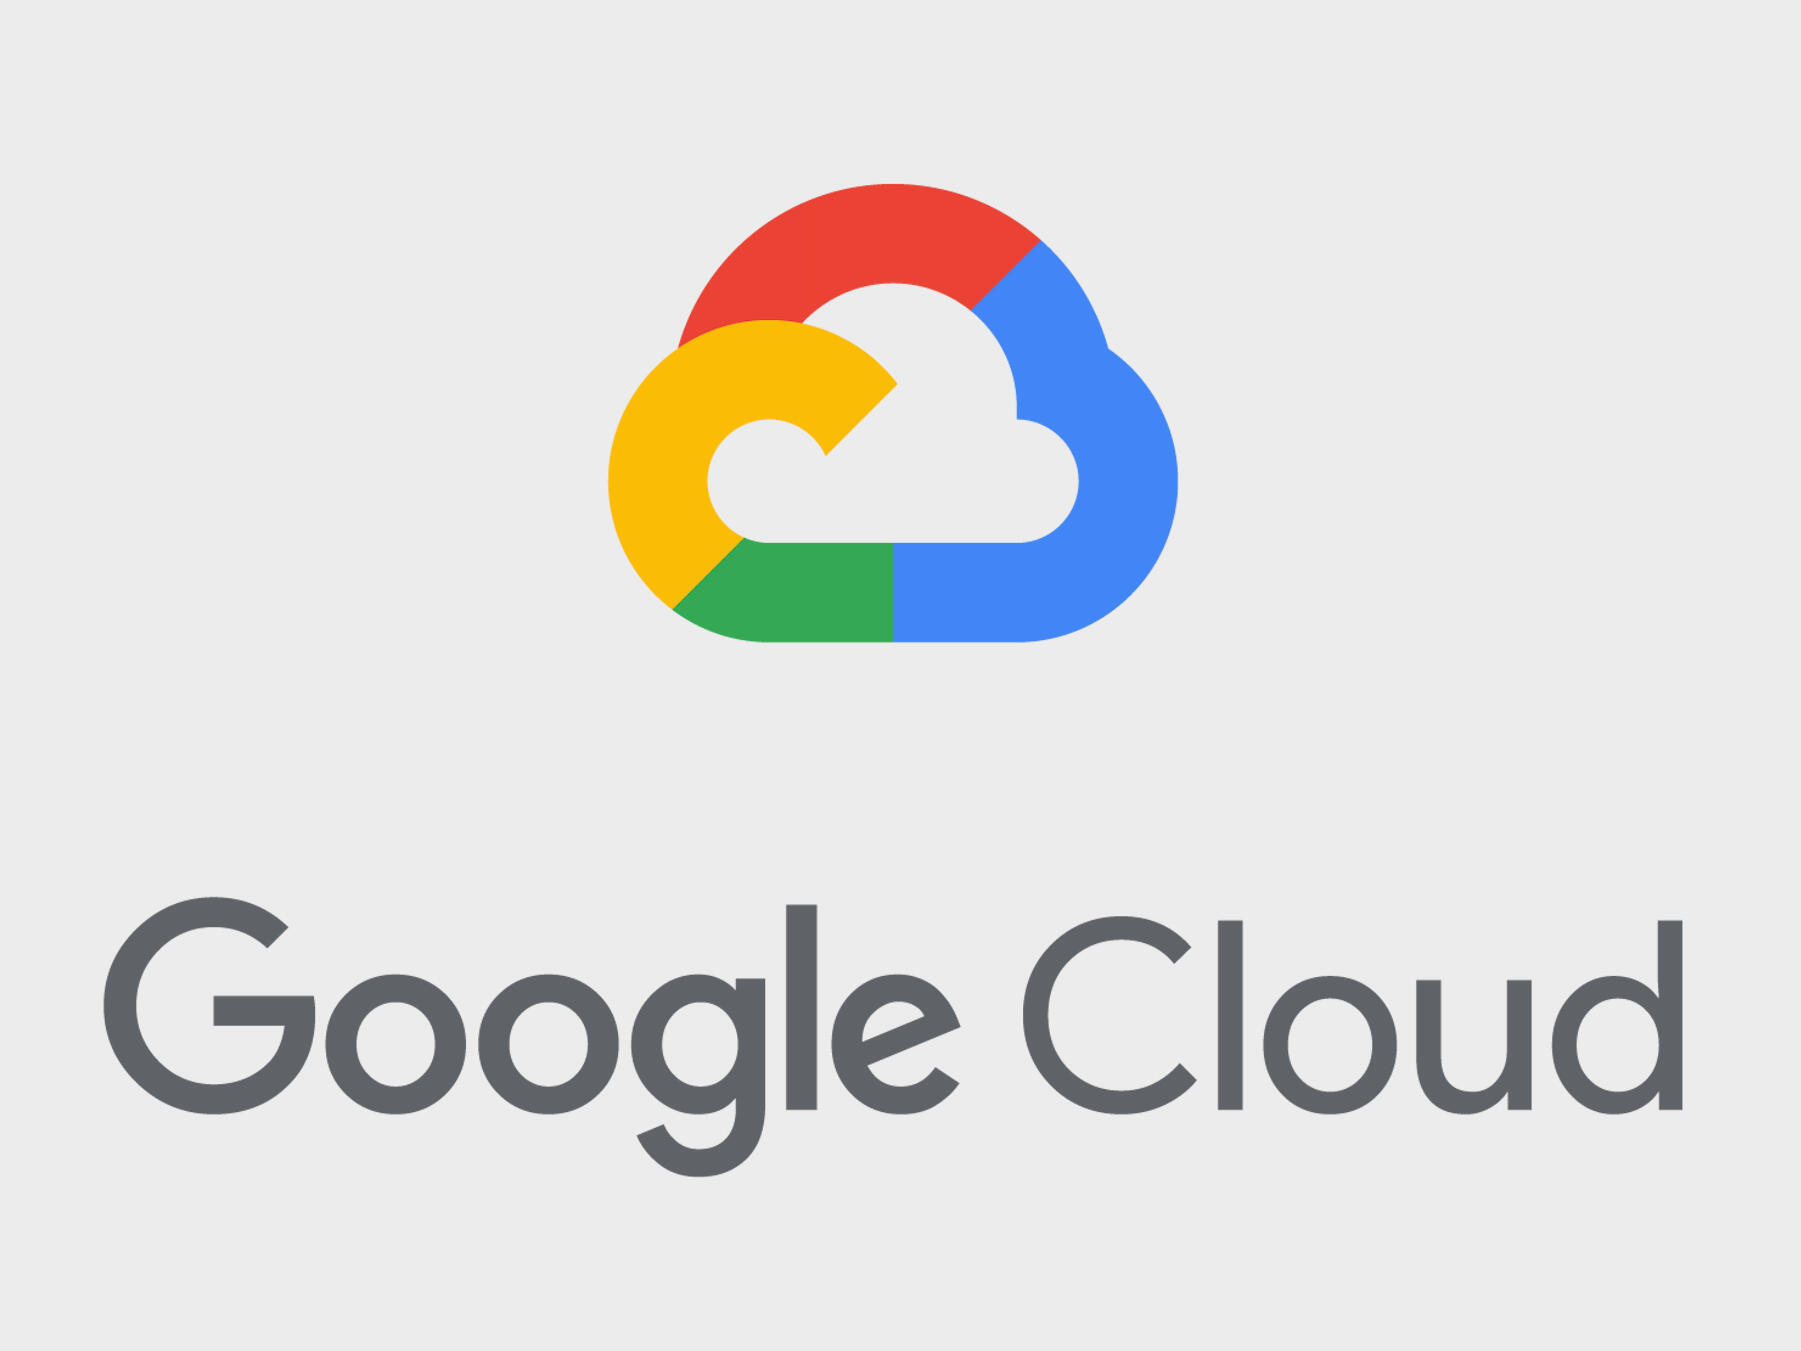 Google Cloud announces new supply chain twin offering